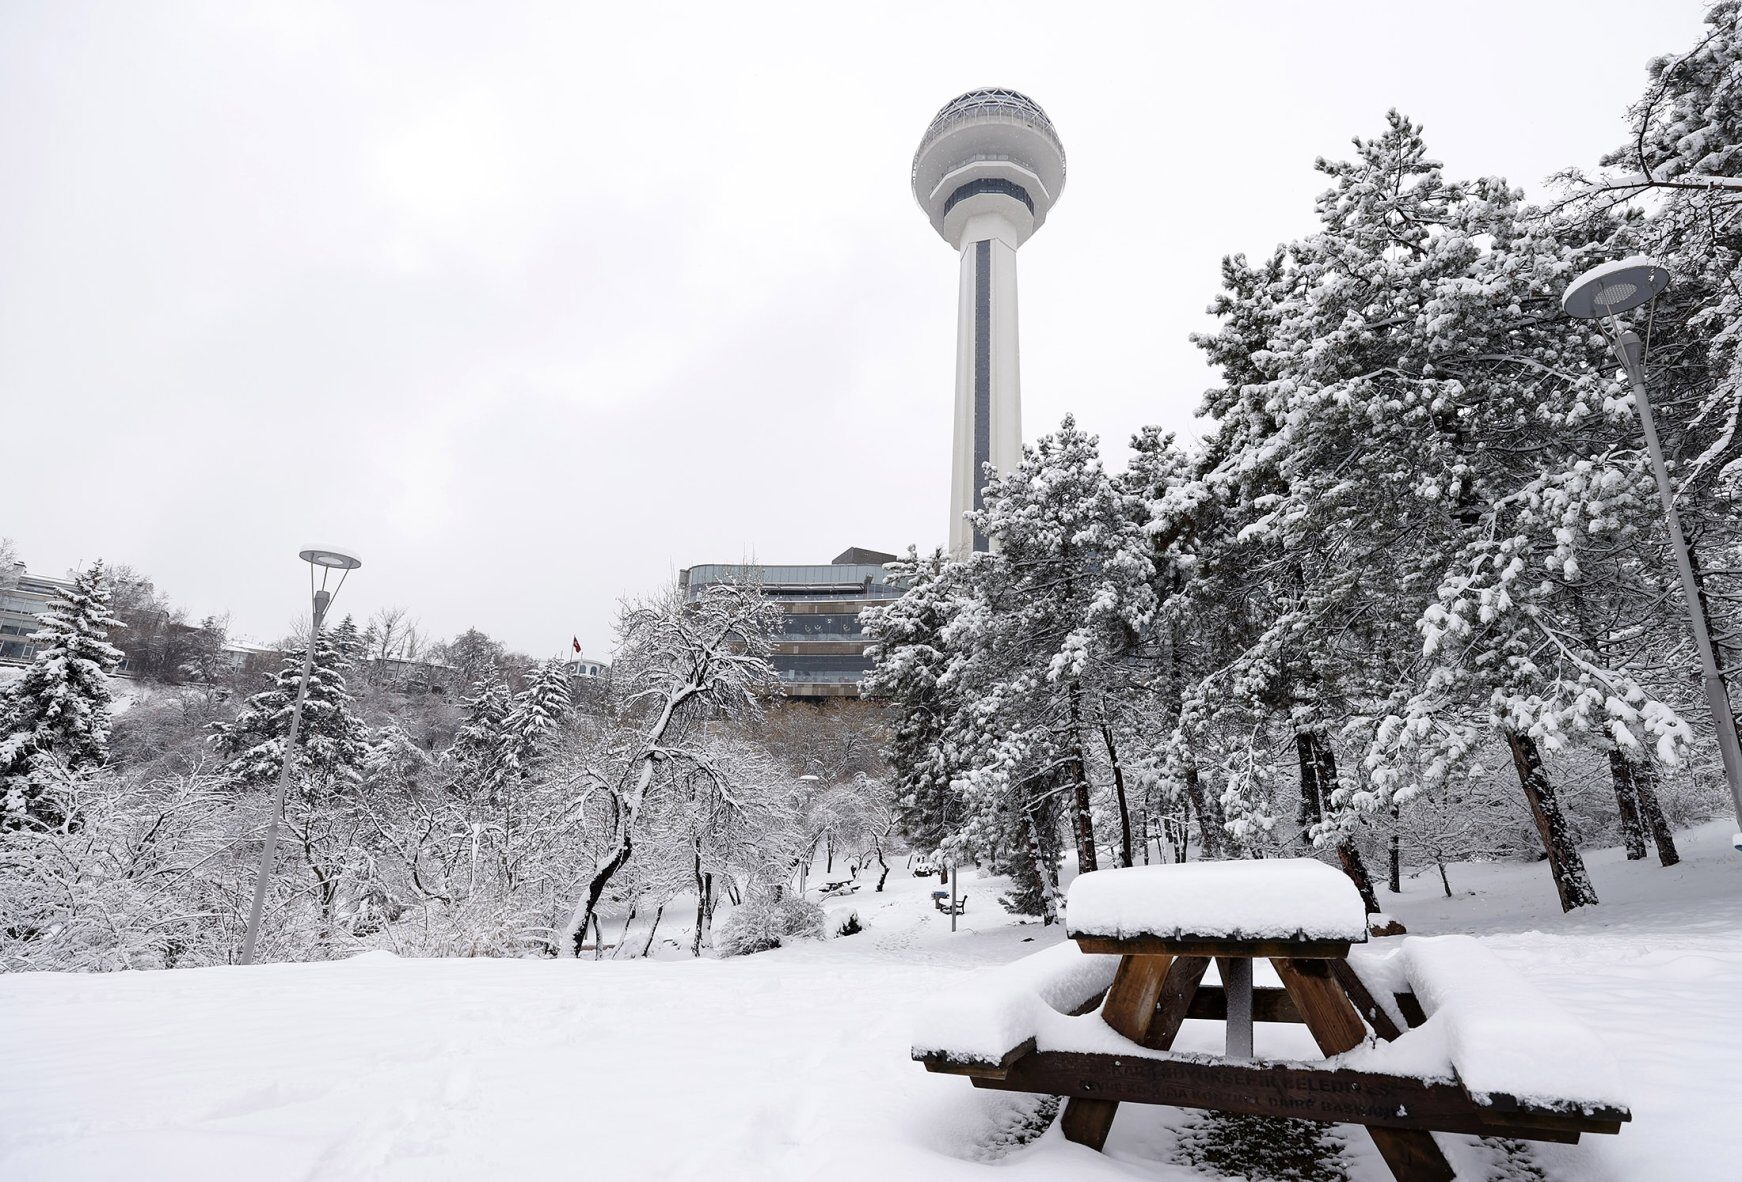 A view of Ataküle during snowfall in the nation's capital, Ankara, March 24, 2021.